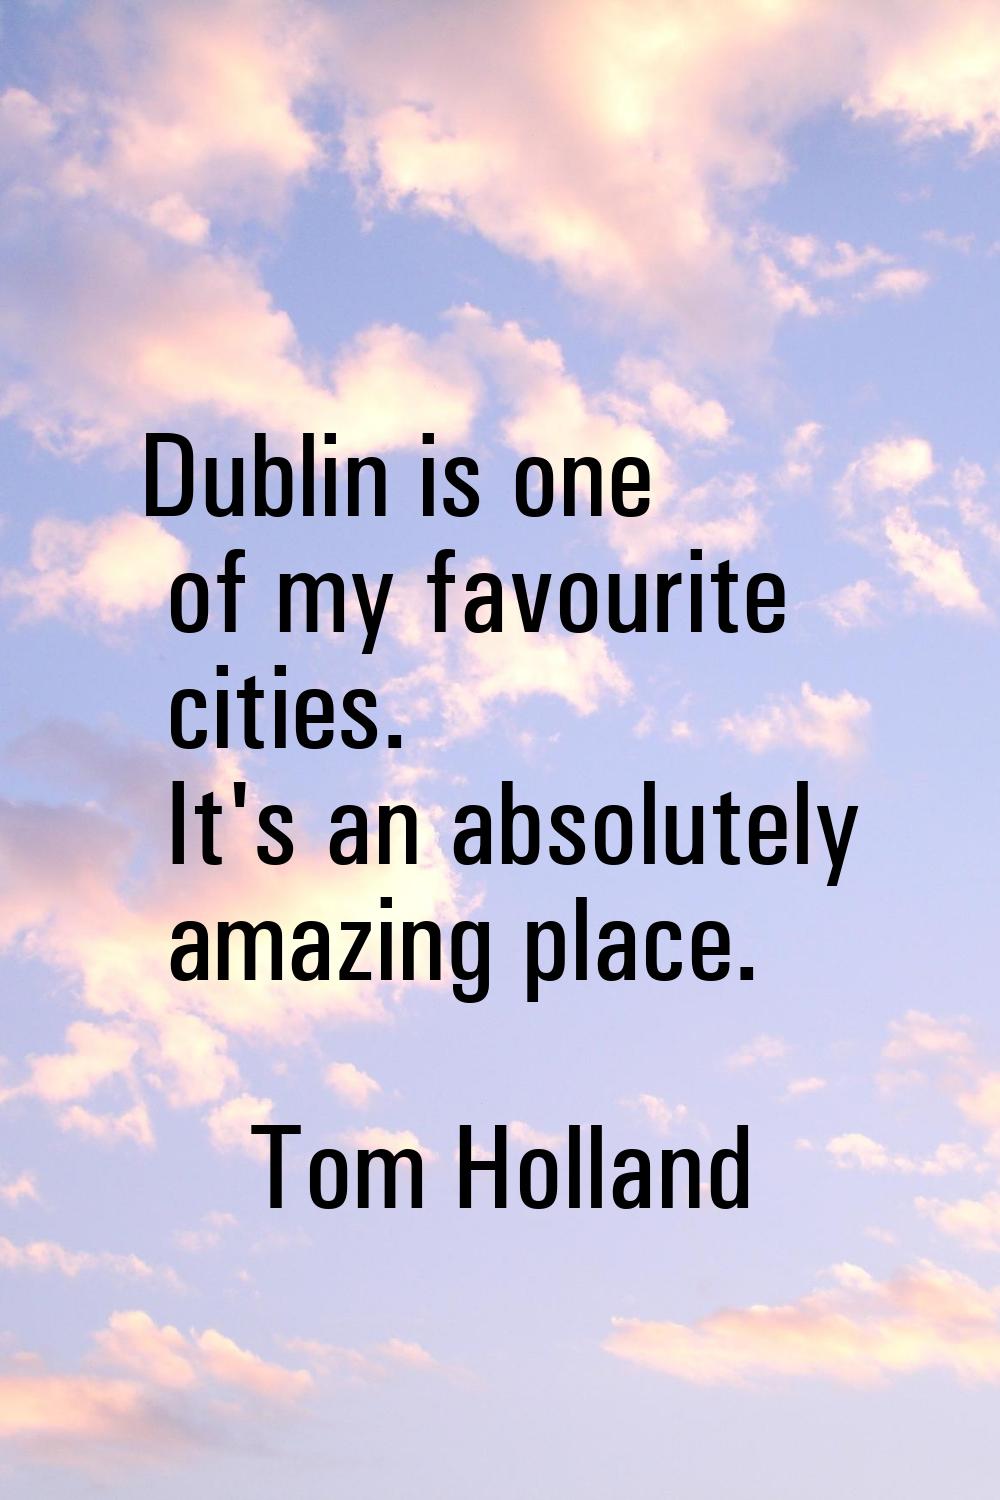 Dublin is one of my favourite cities. It's an absolutely amazing place.